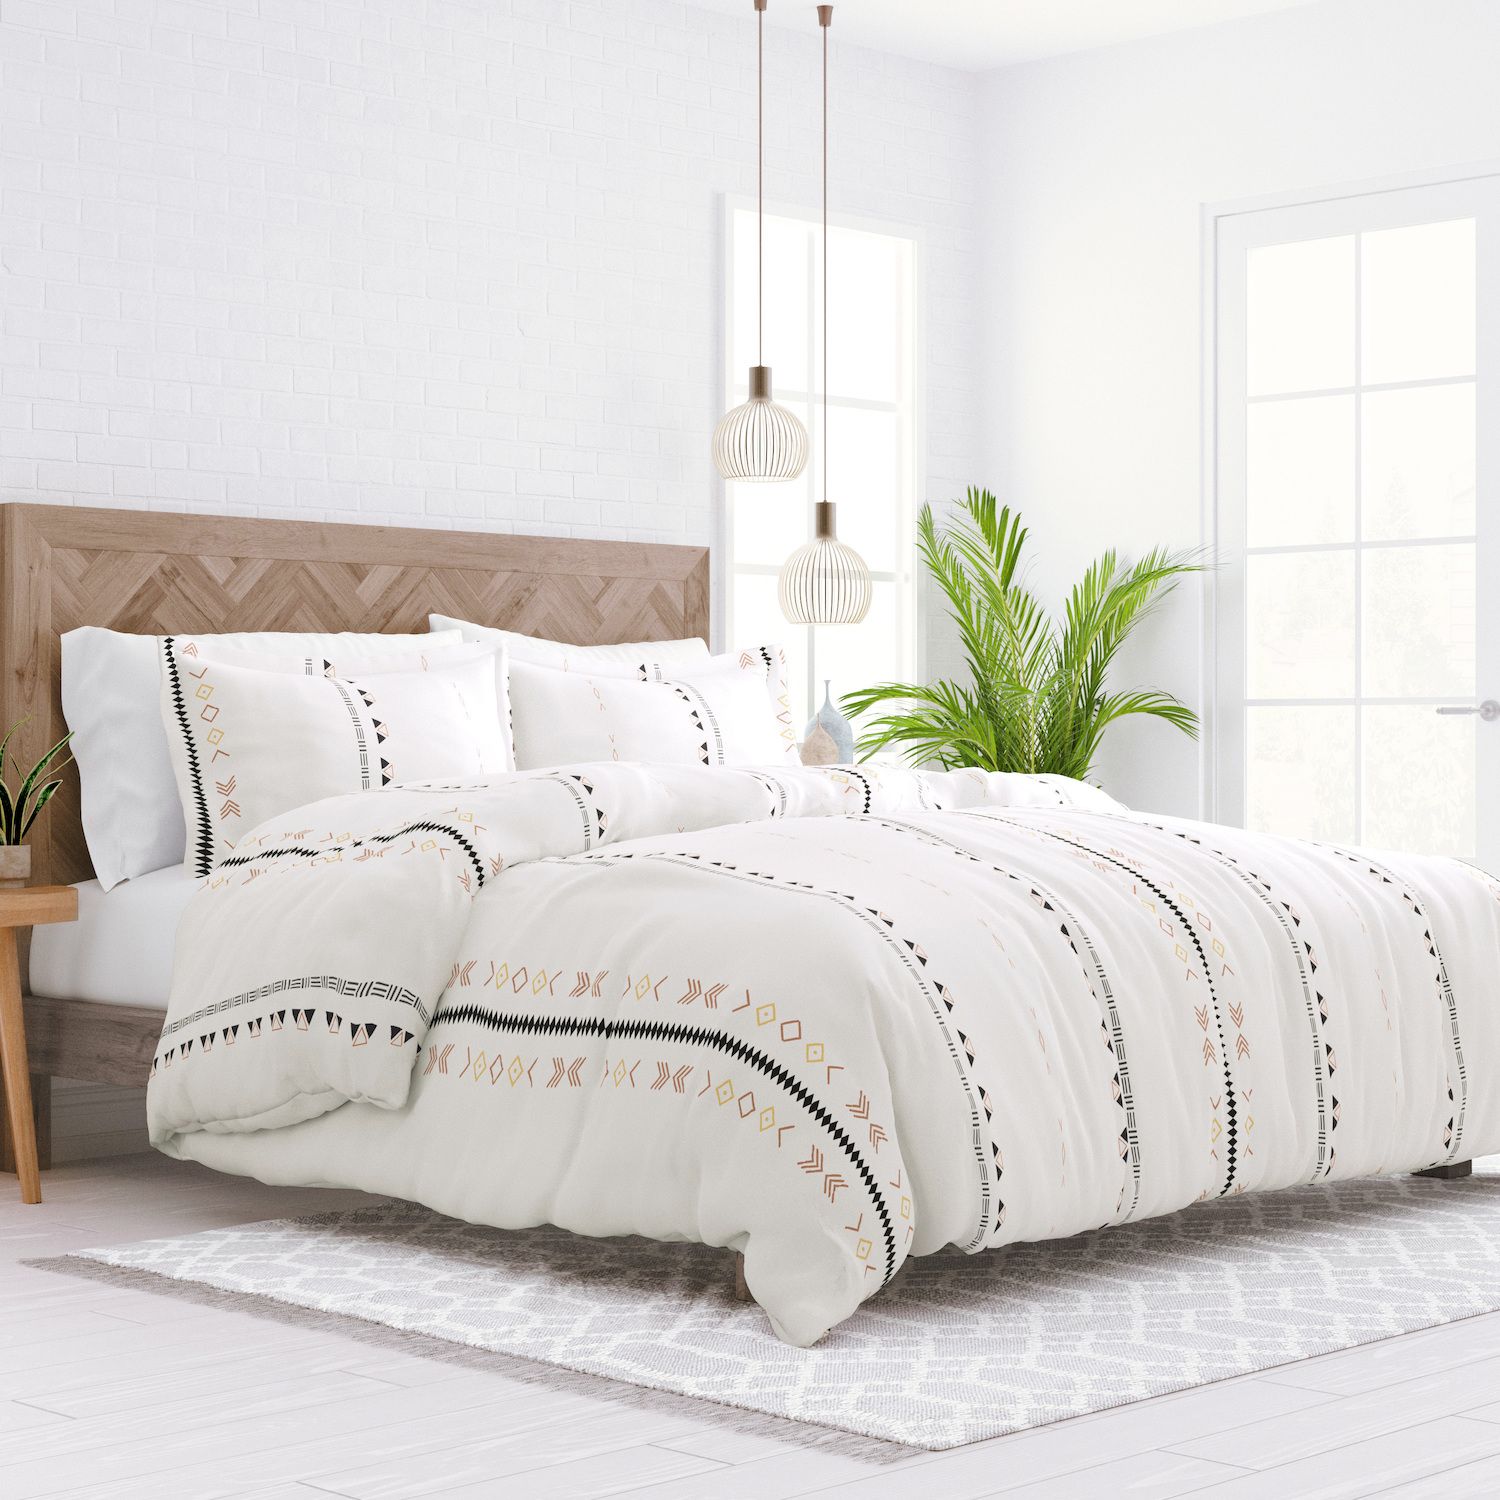 Image for Home Collection Premium Ultra Soft Natural Geo Lines Duvet Cover Set at Kohl's.